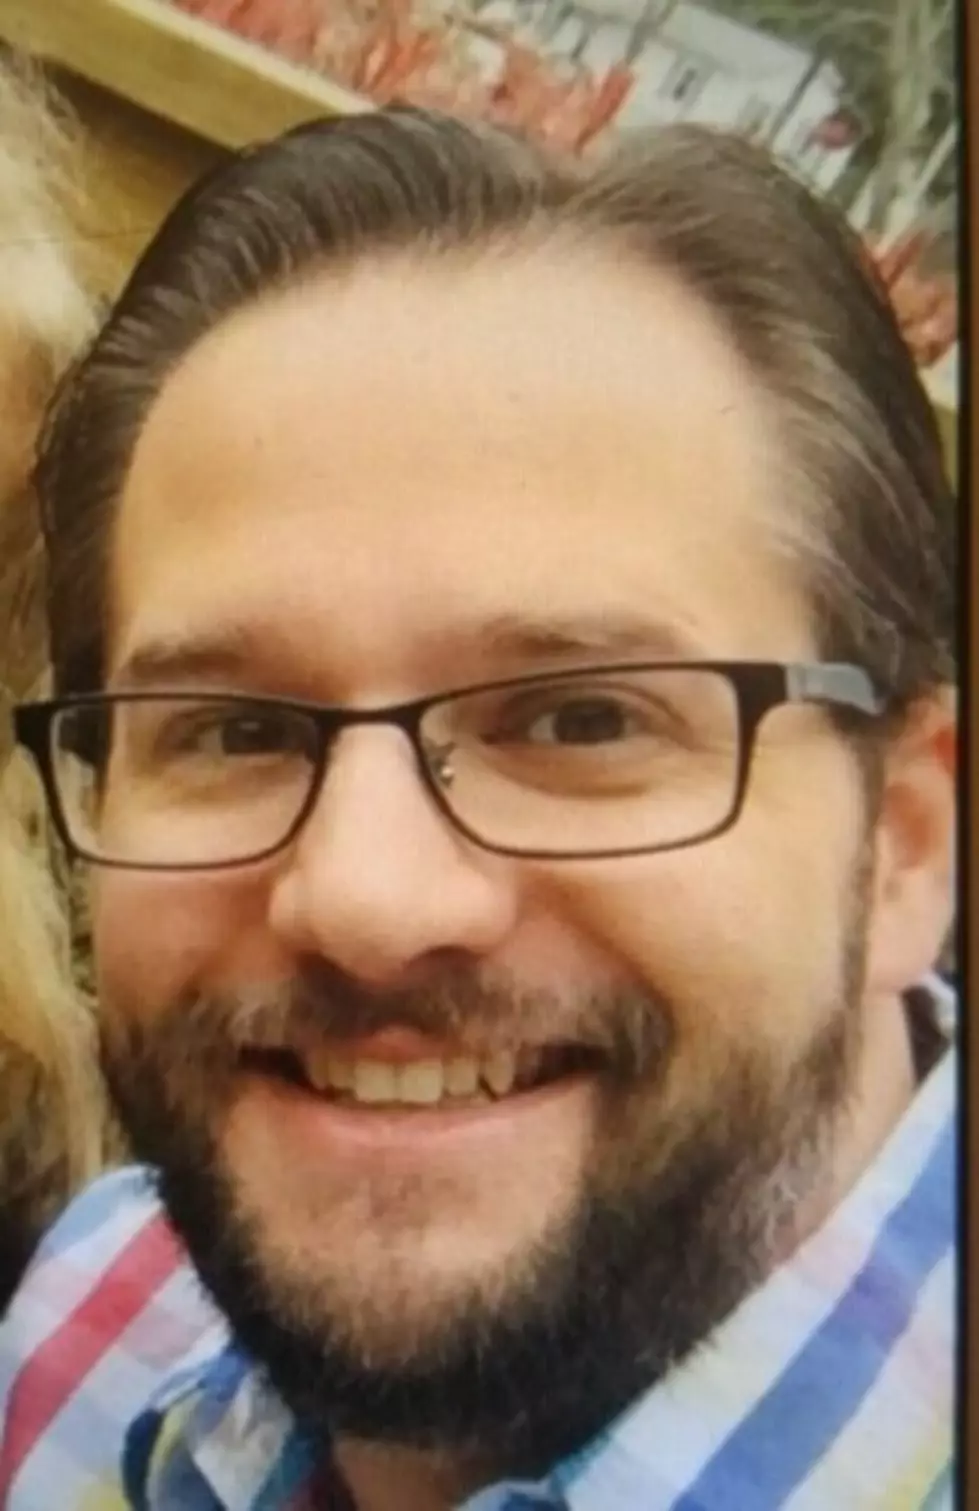 South Jersey businessman missing since Thursday and may be in NYC area